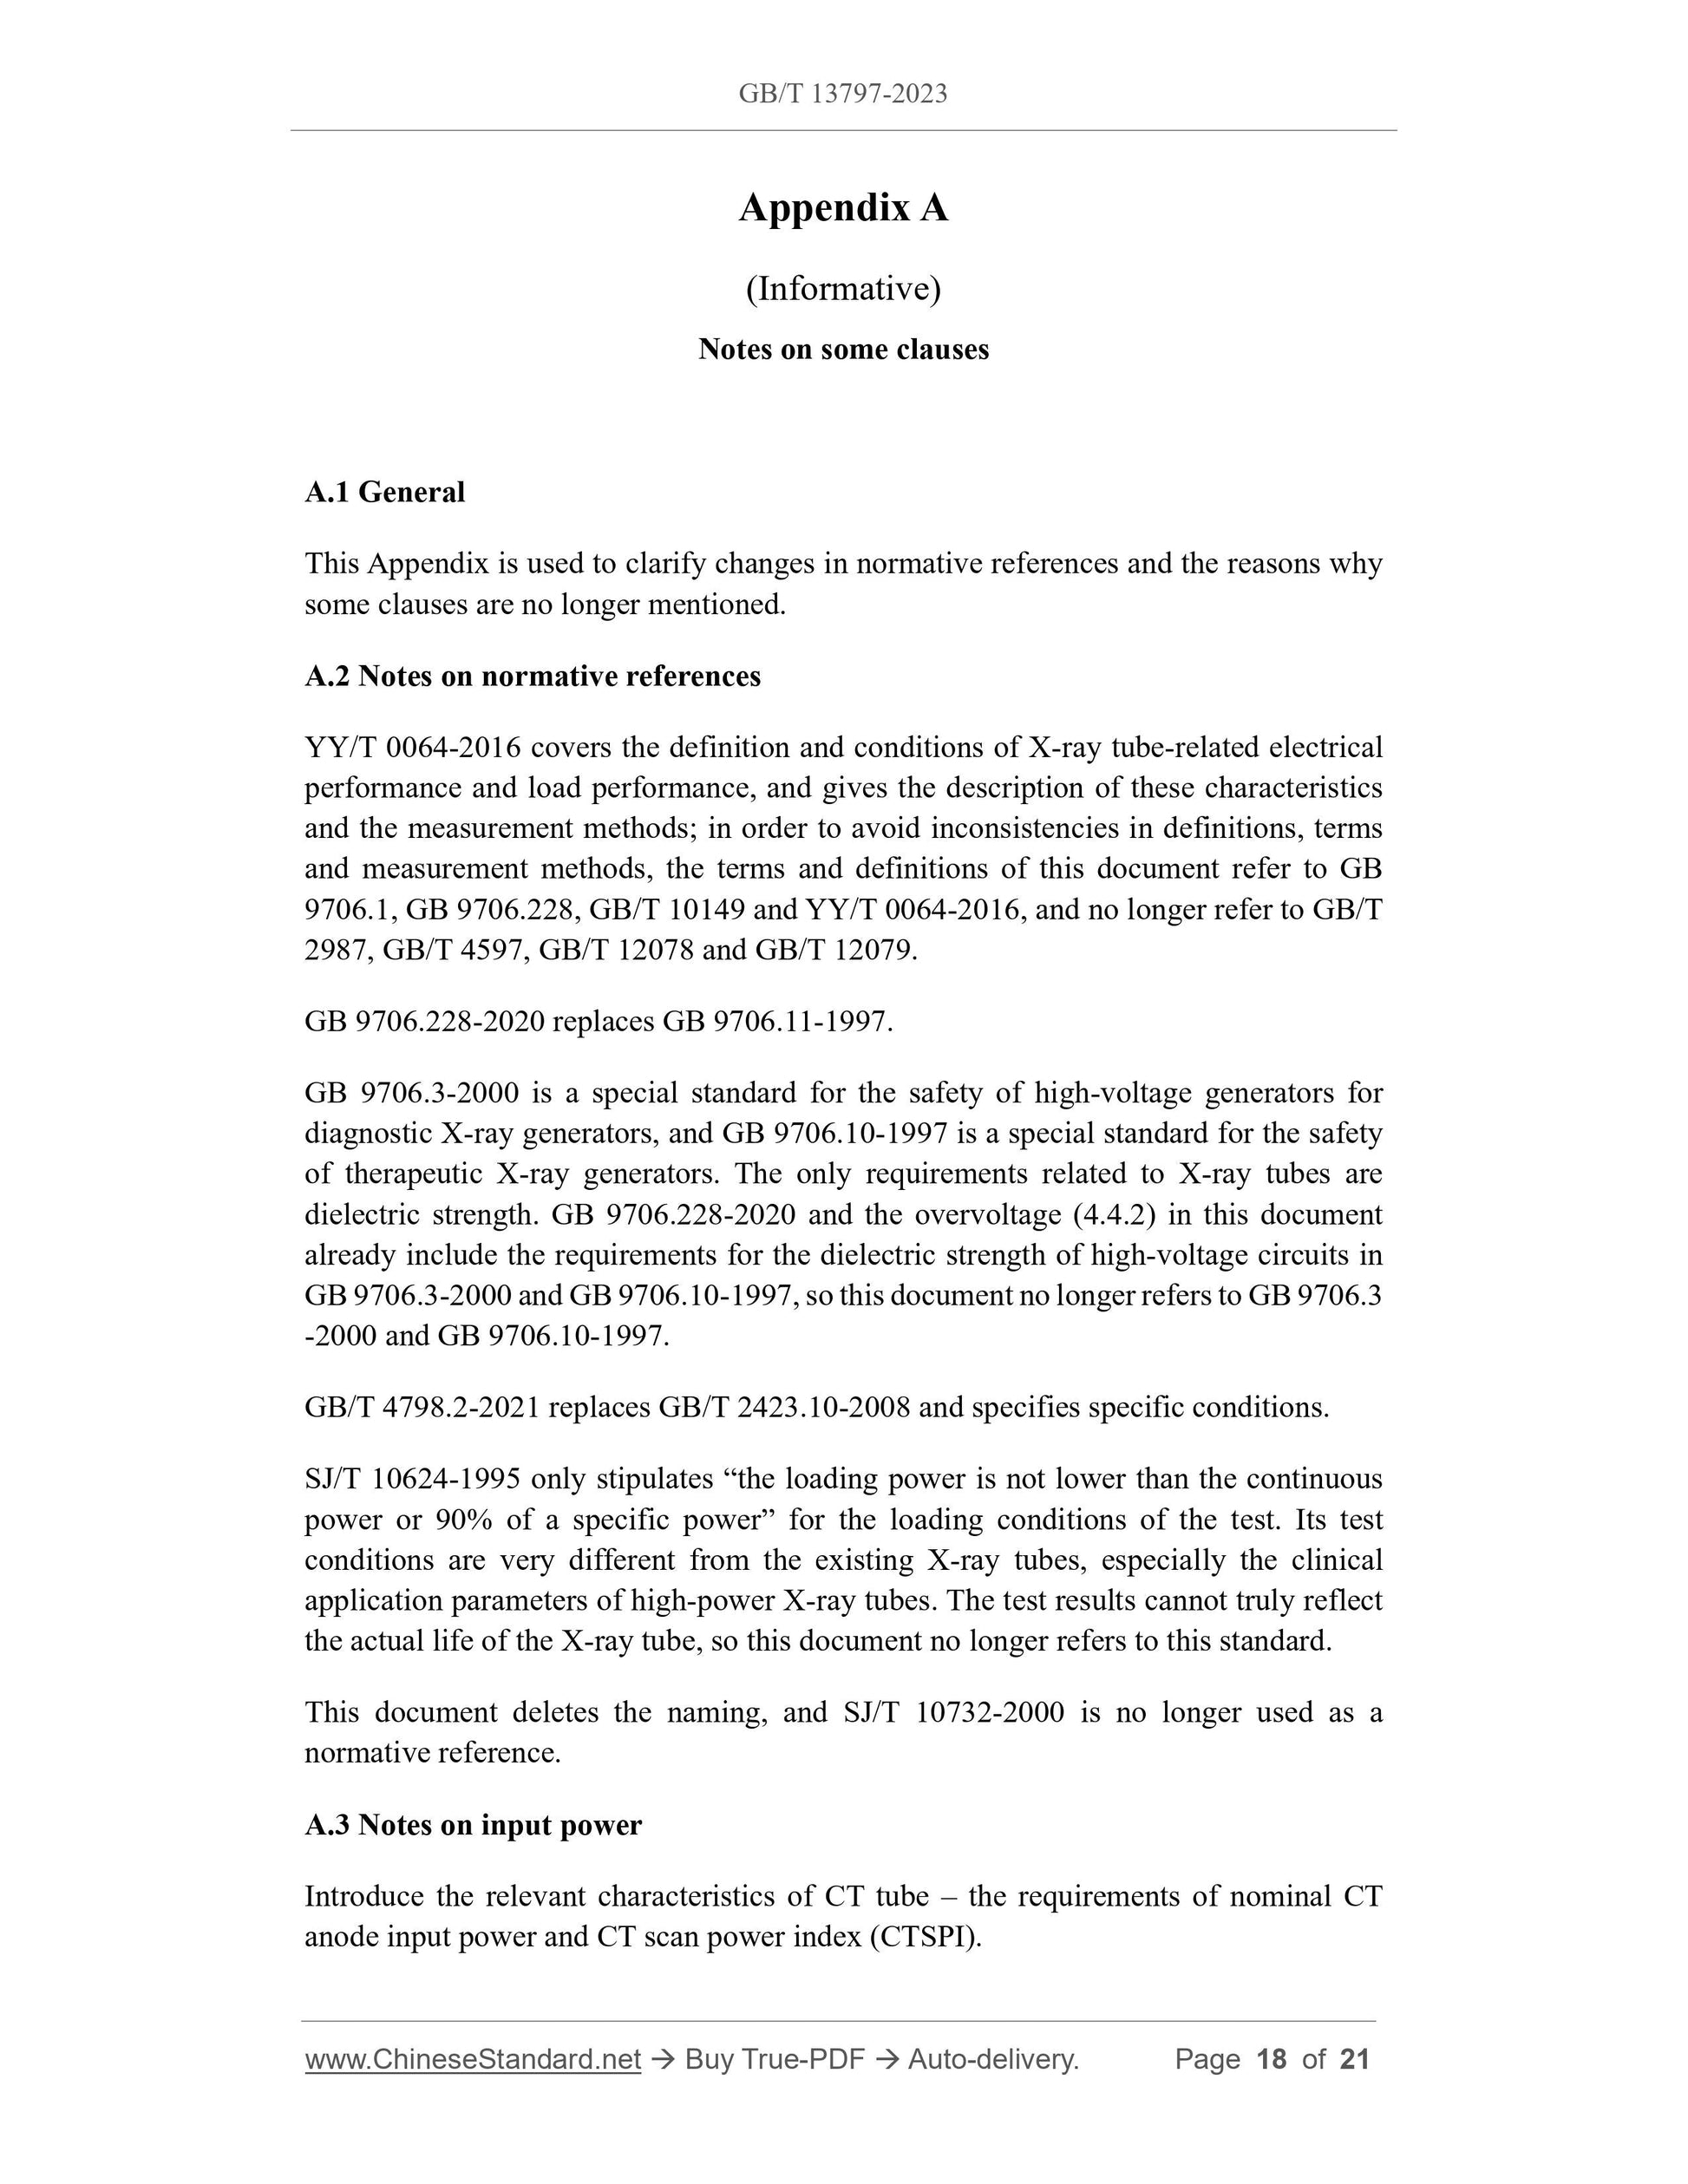 GB/T 13797-2023 Page 10